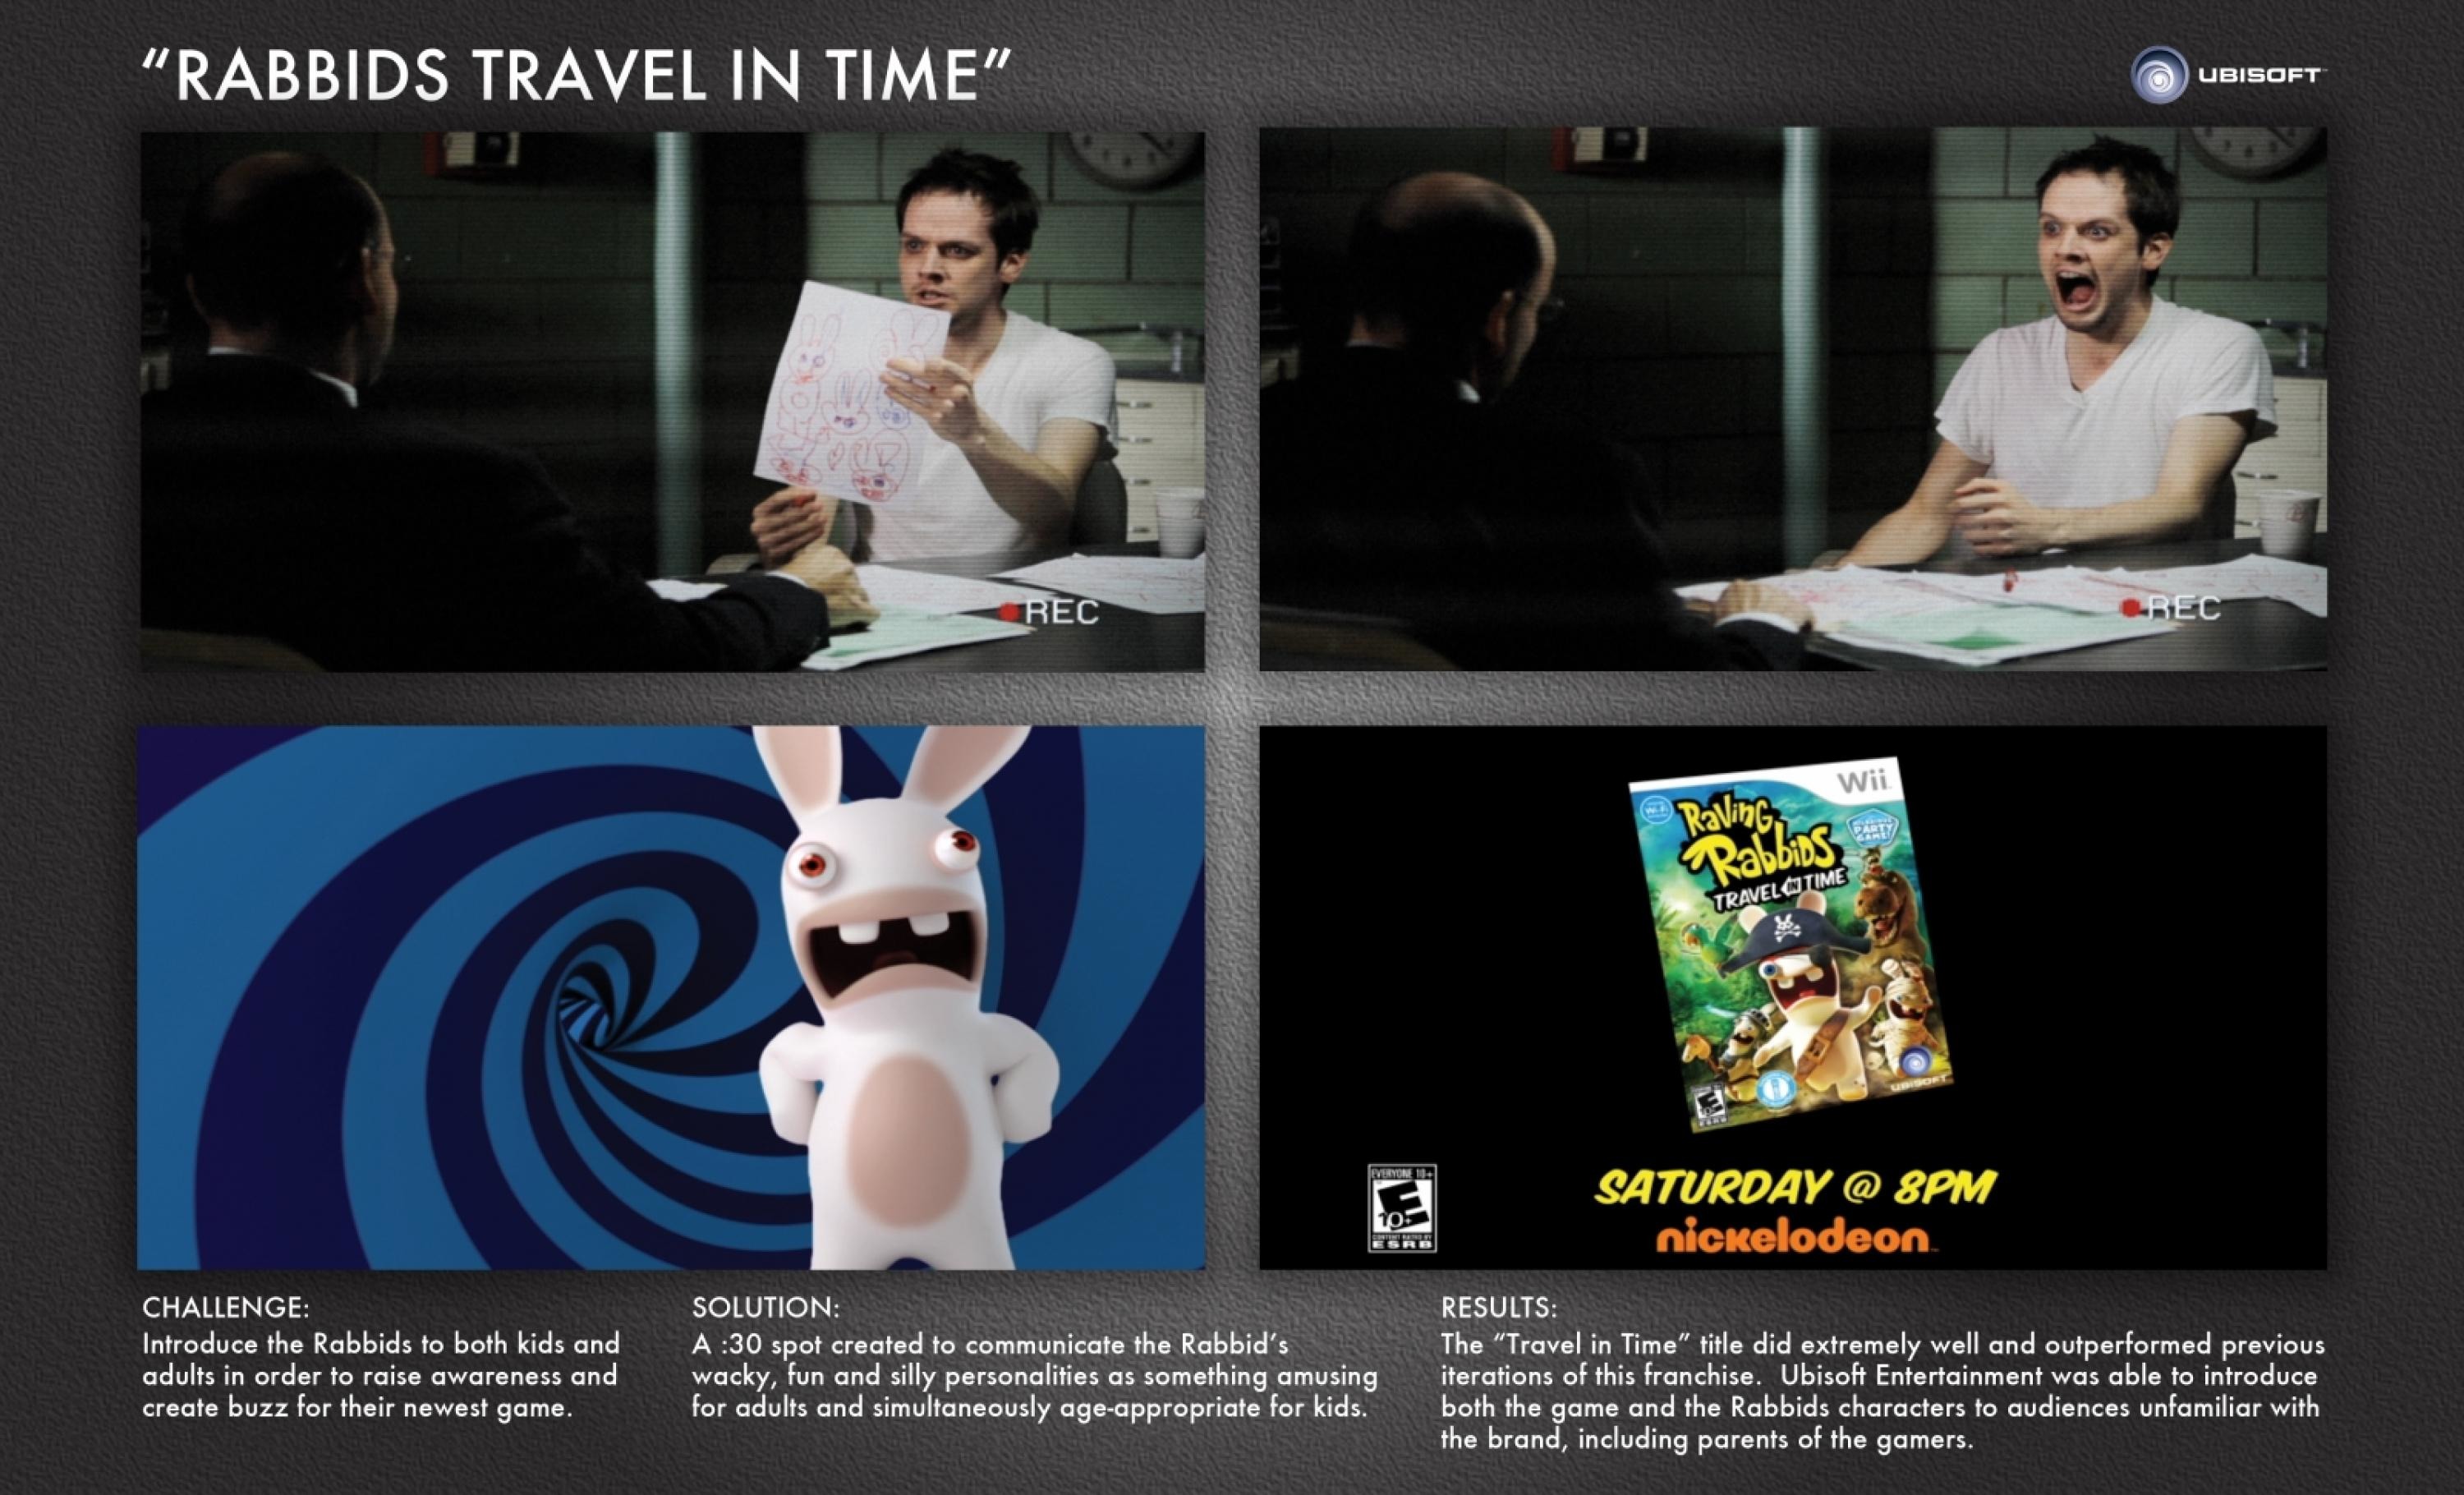 RABBIDS TRAVEL IN TIME